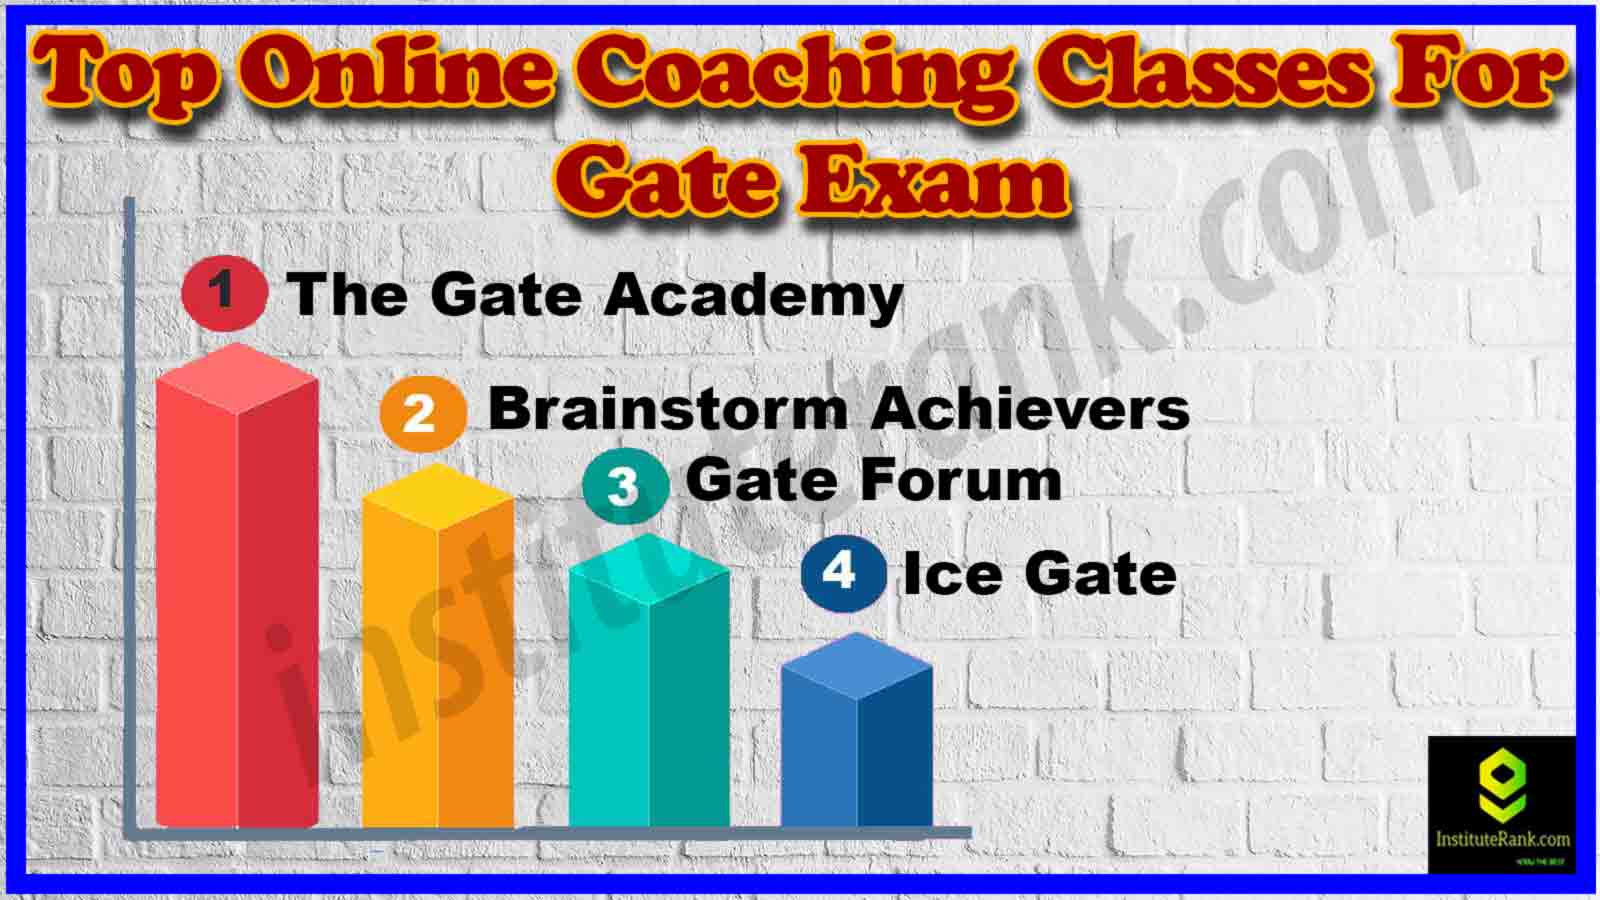 Top Online Coaching for Gate exam